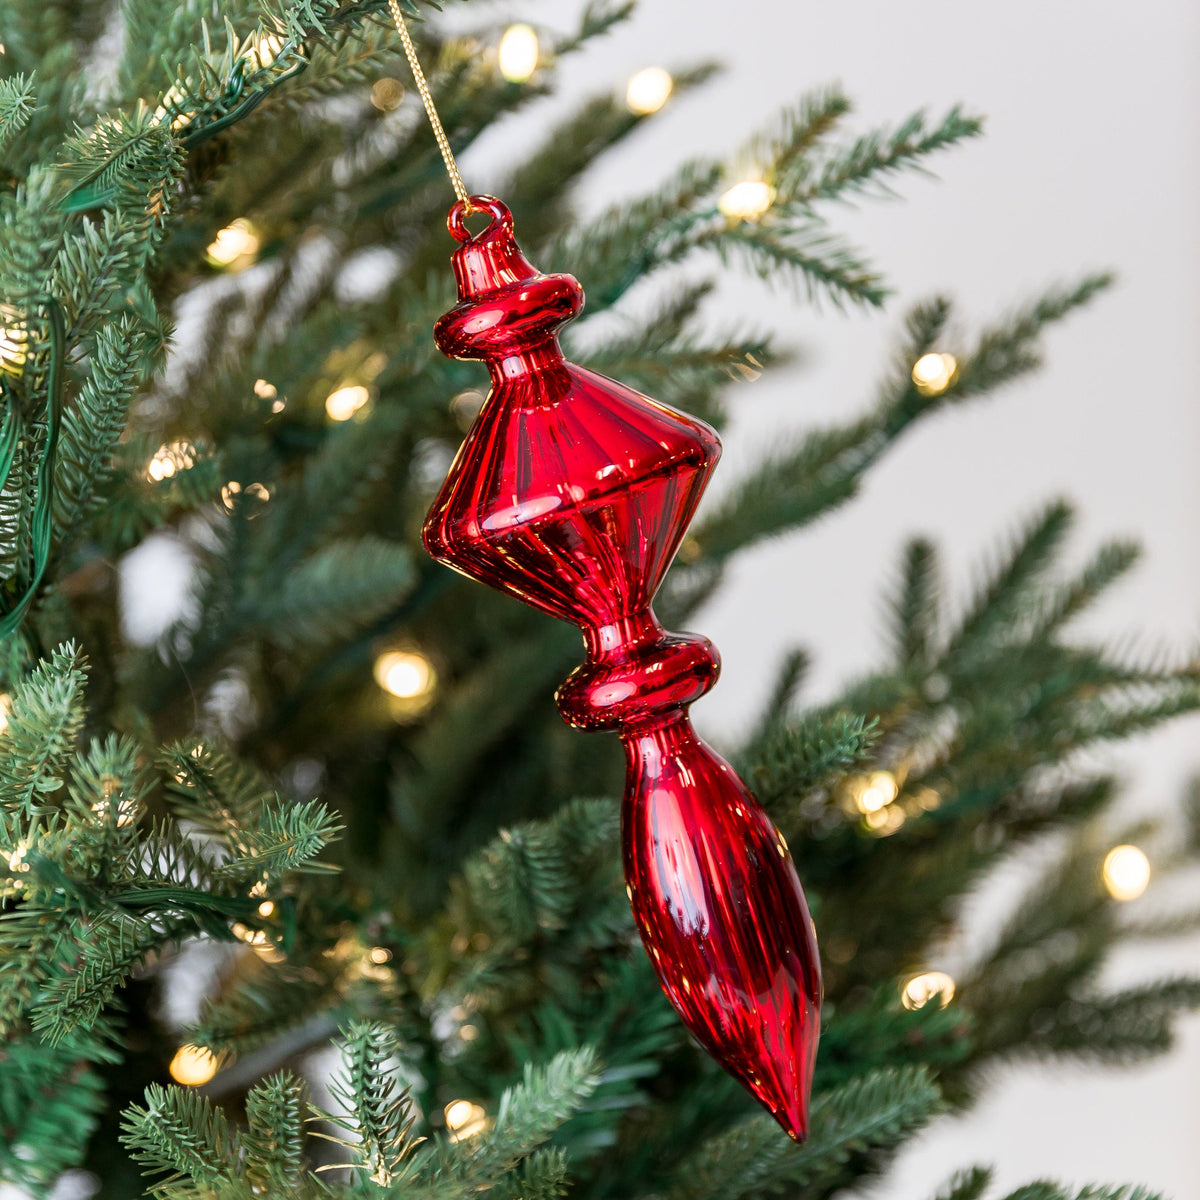 10" Red Finial Glass Ornament Assorted